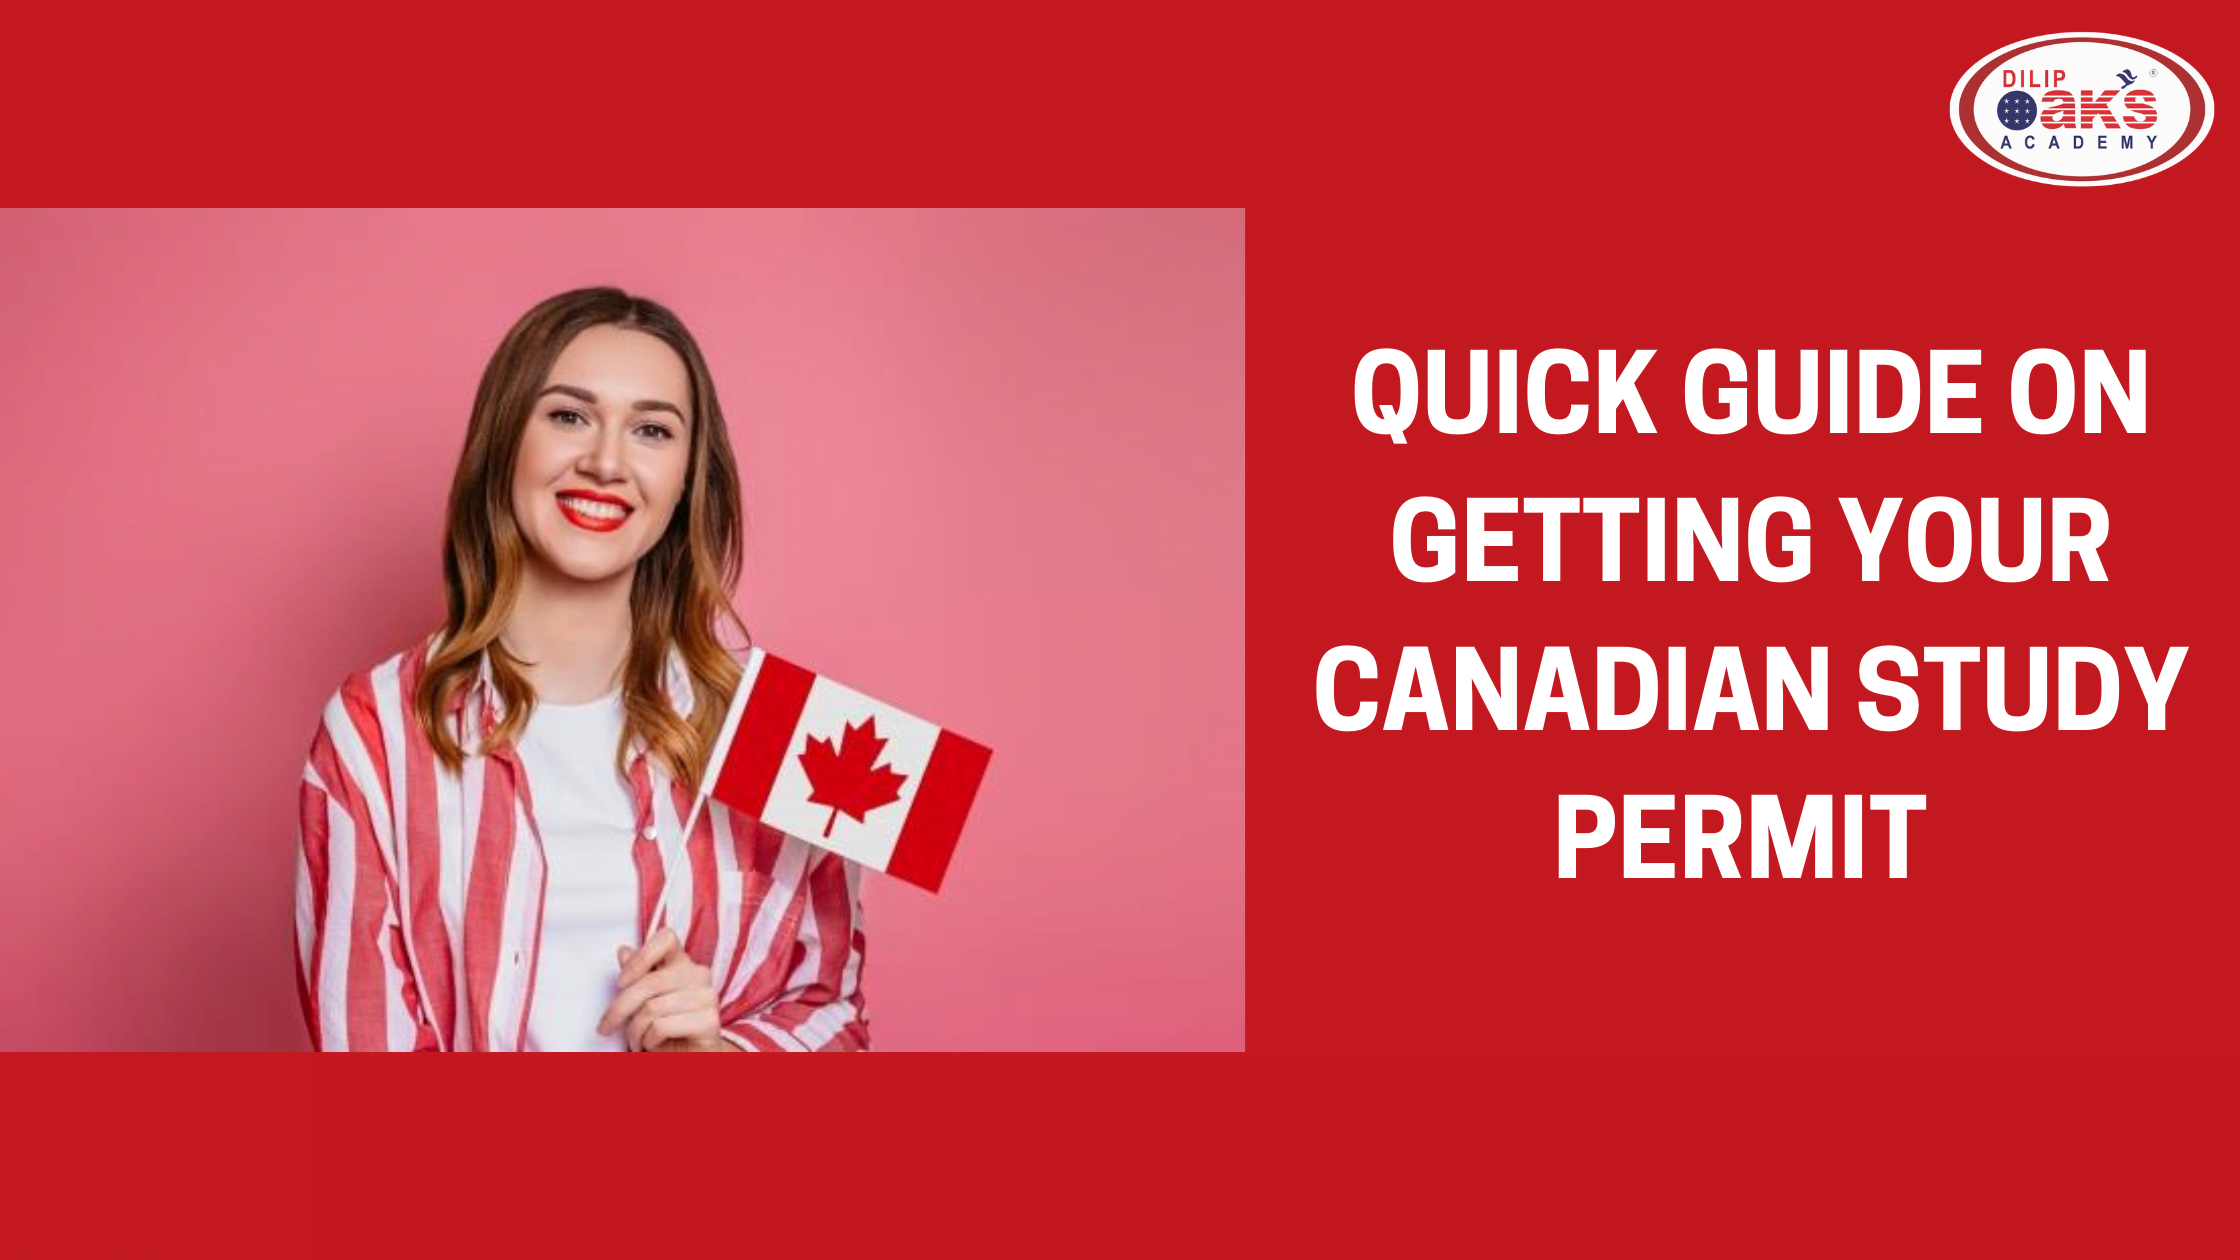 QUICK GUIDE ON GETTING YOUR CANADIAN STUDY PERMIT (1)